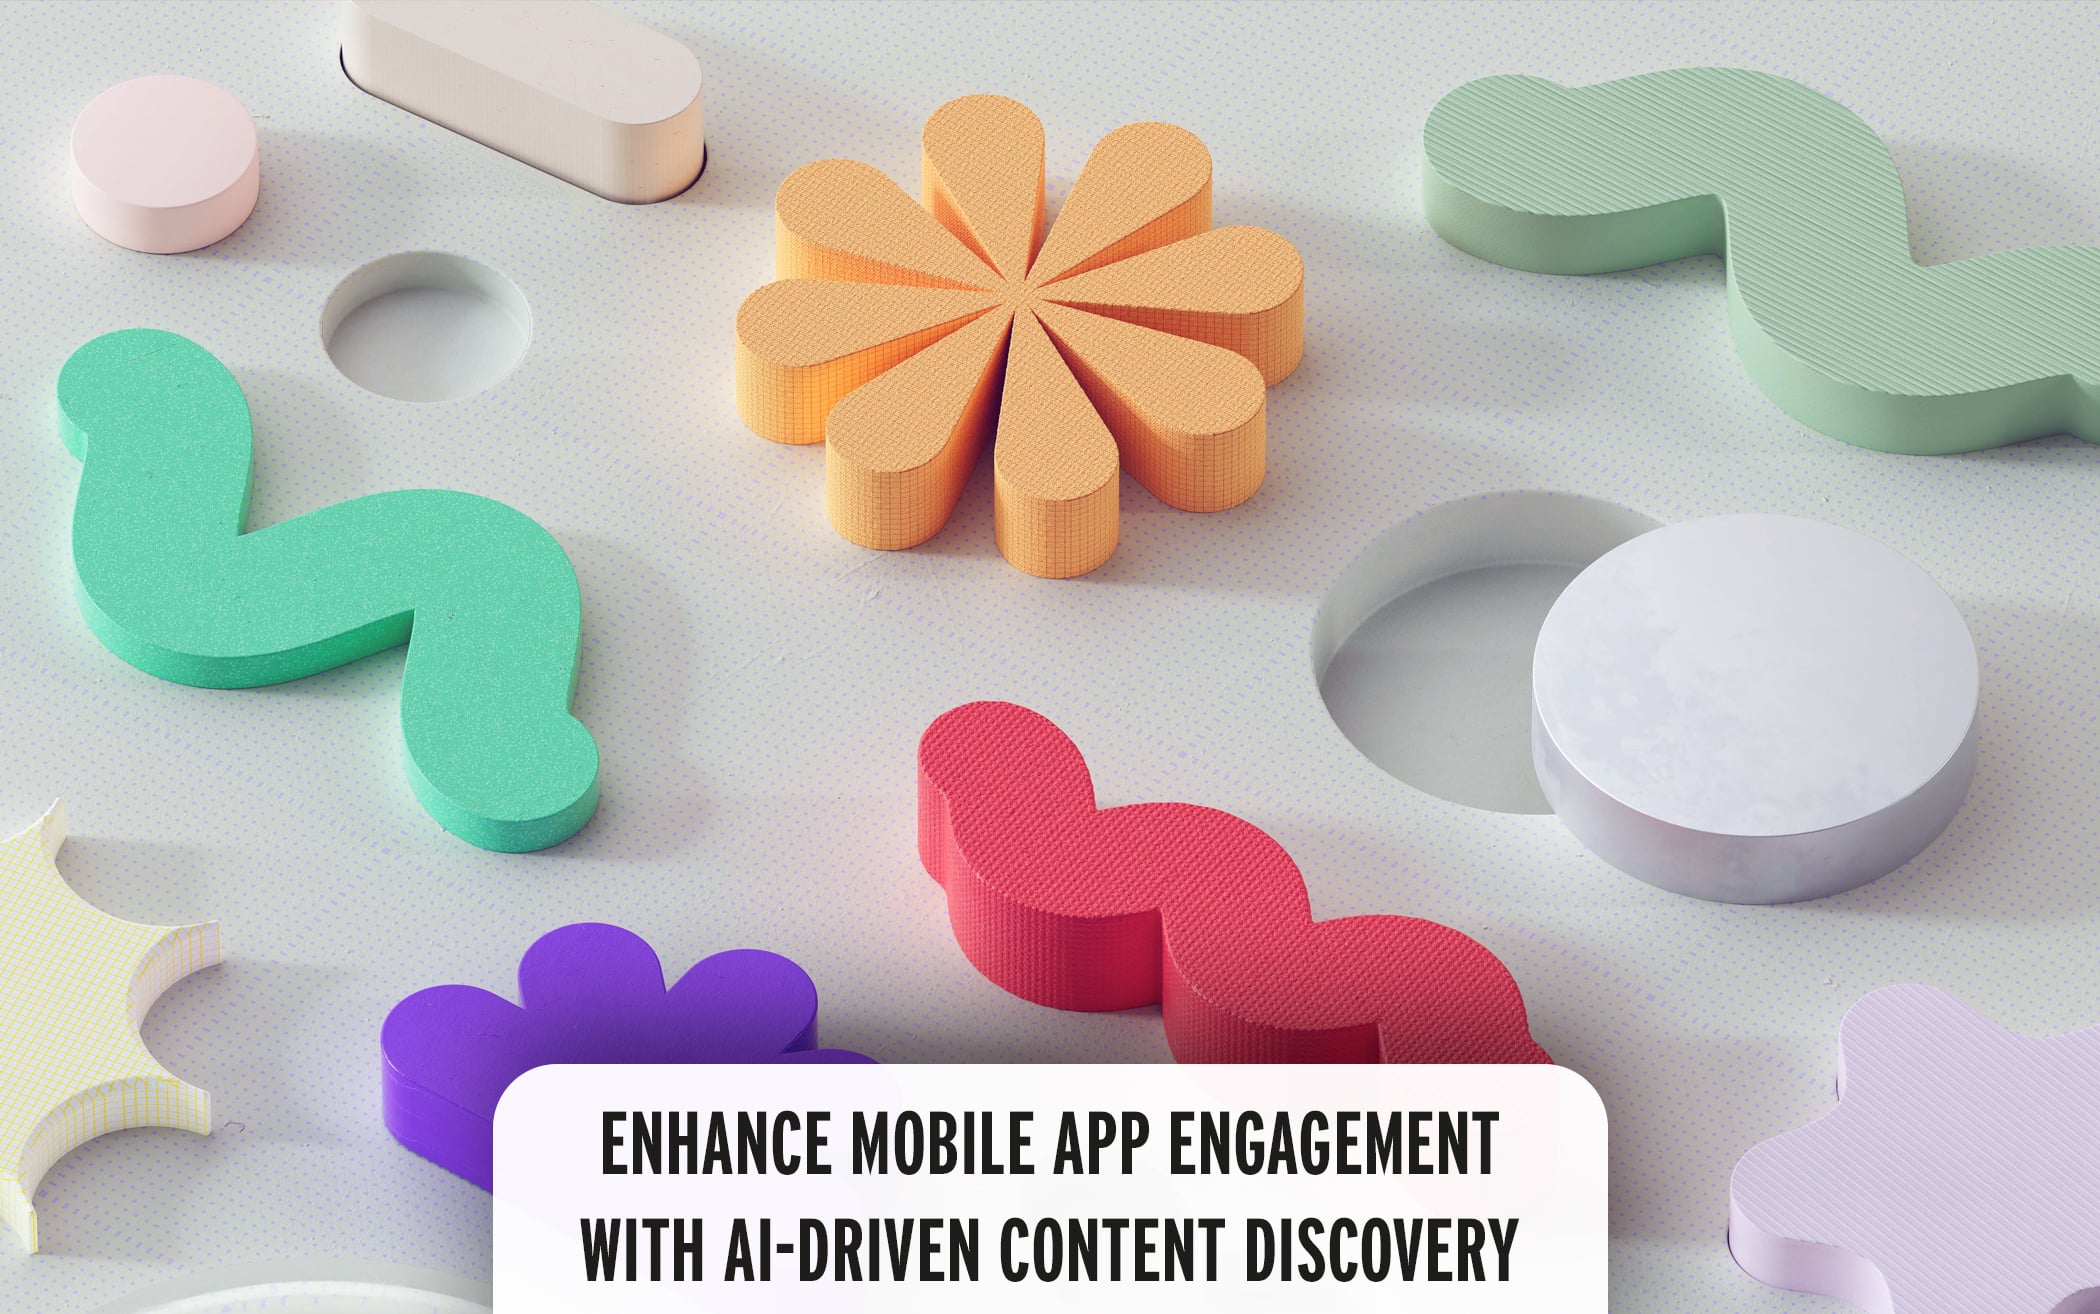 Enhance Mobile App Engagement with AI-Driven Content Discovery